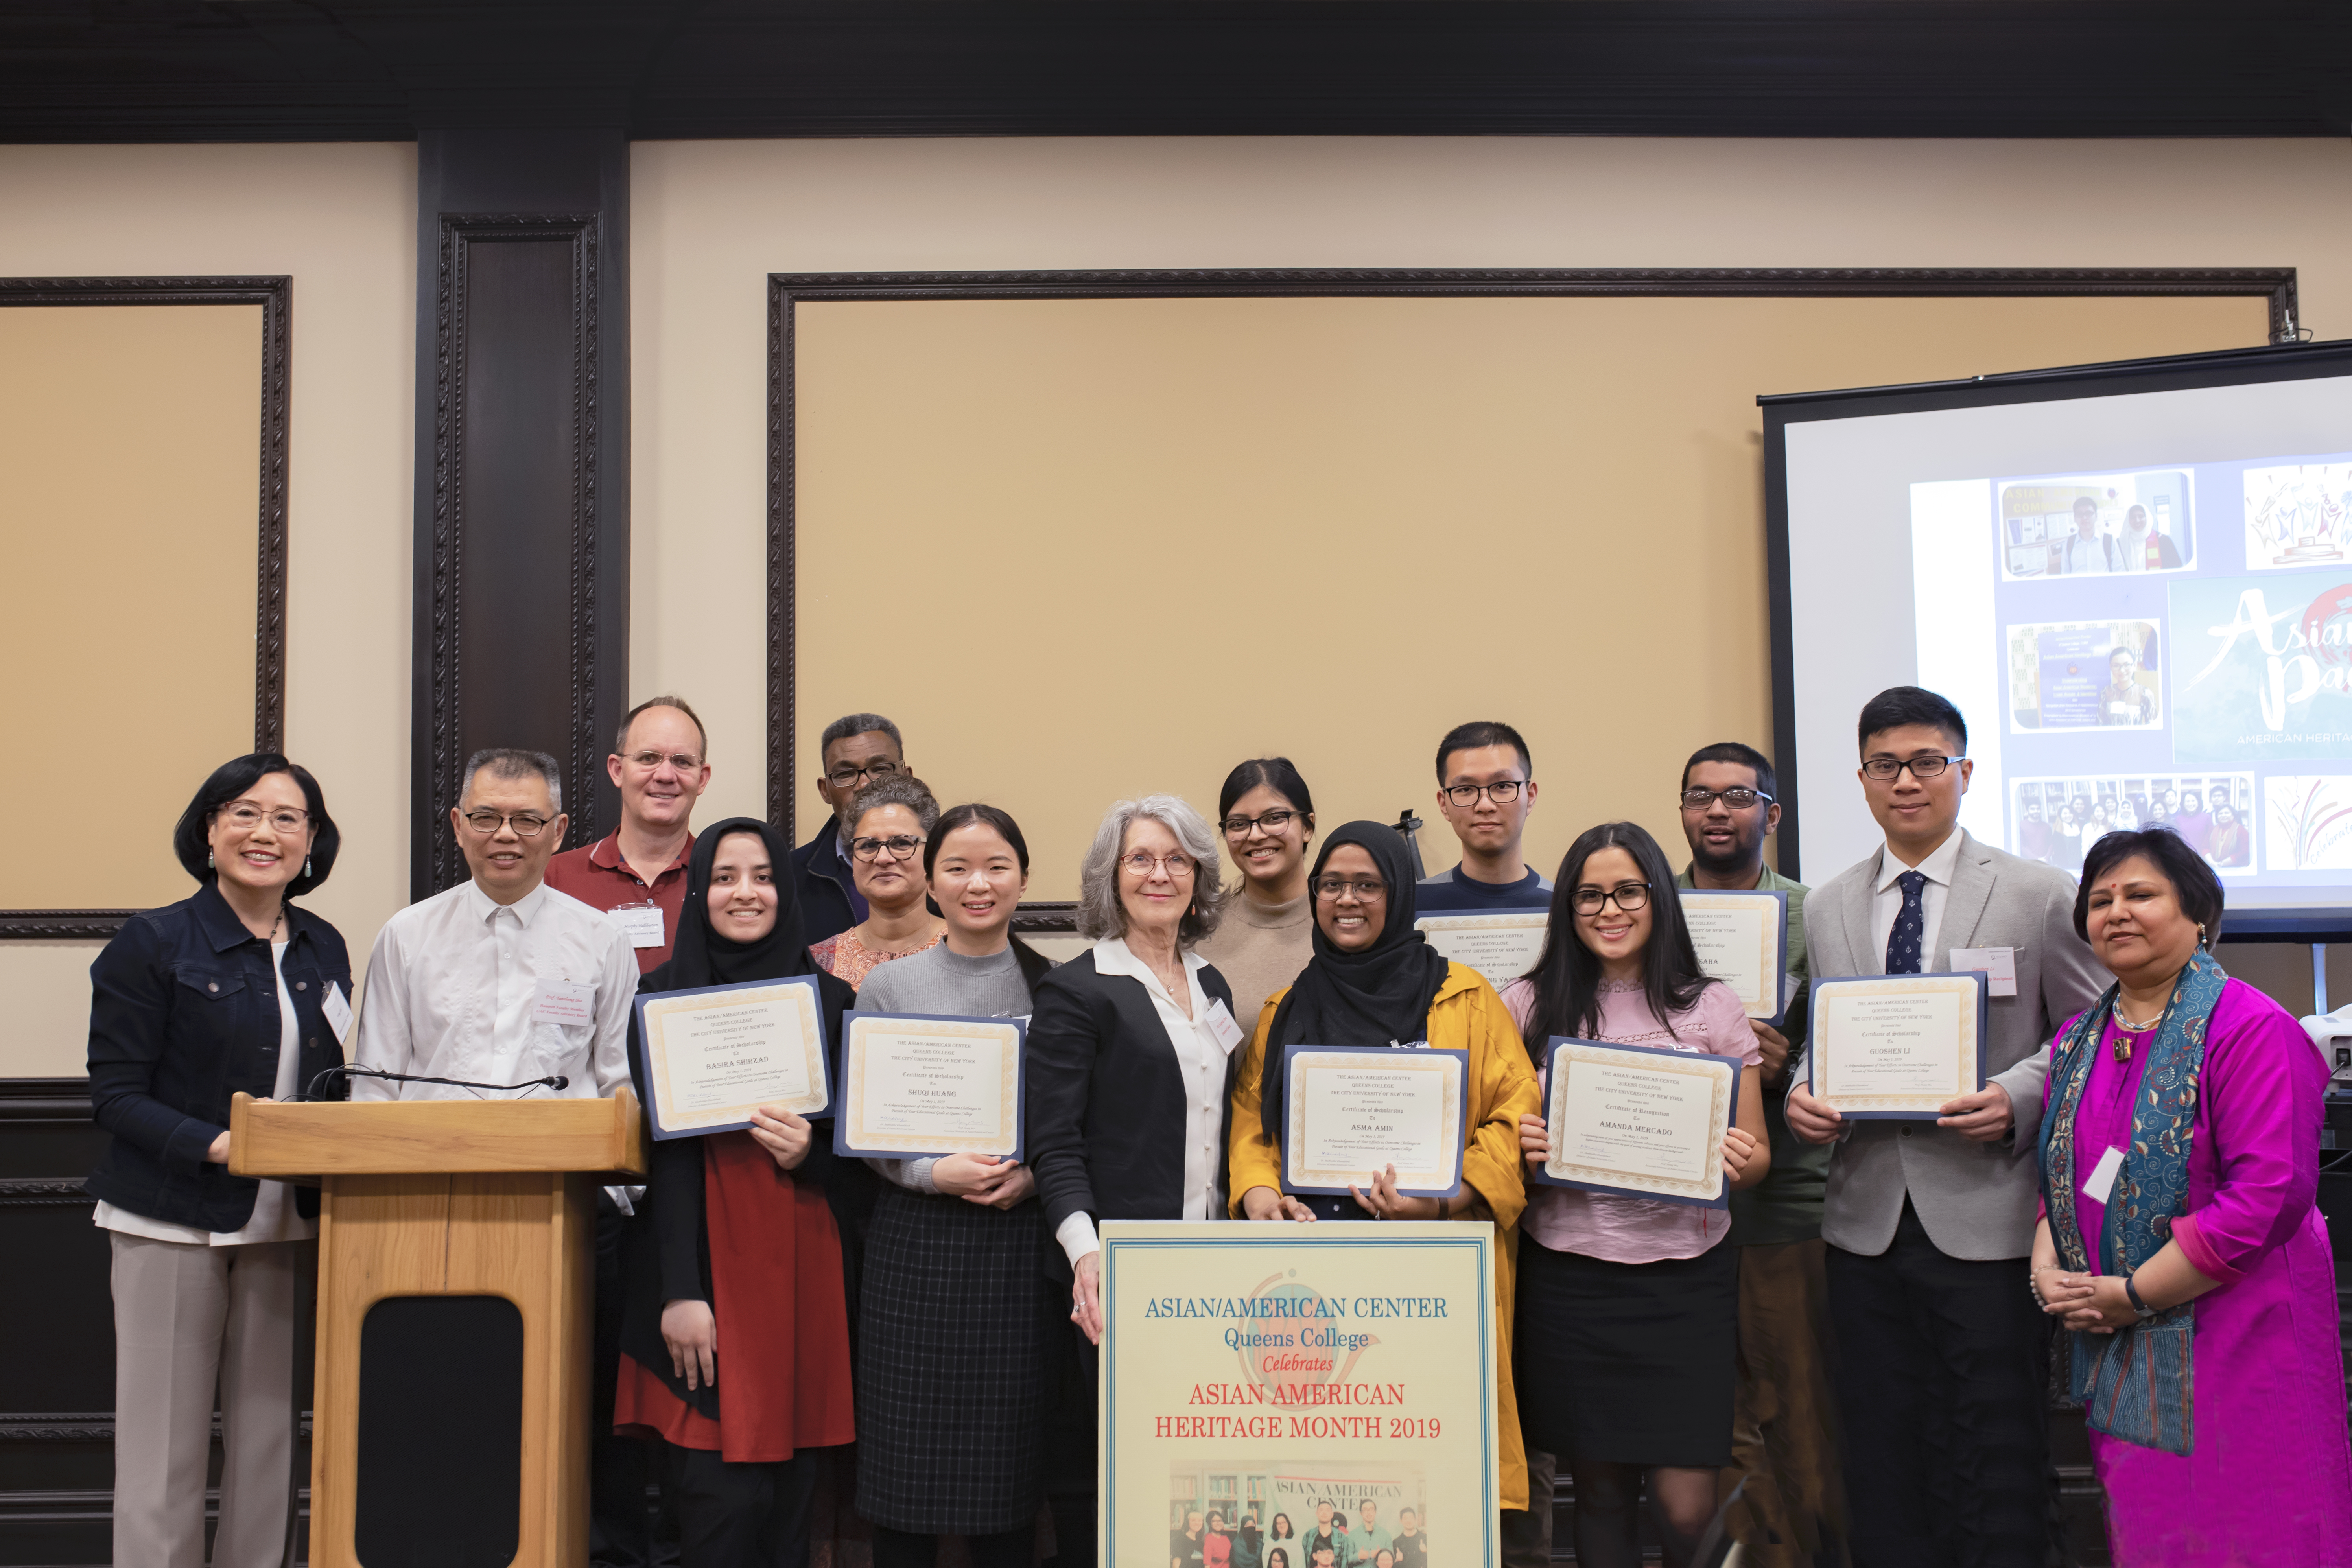 Credit: Asian-American Center Caption: Scholarship recipients pose with their scholarships, along with the Directors of the Asian-American Center.